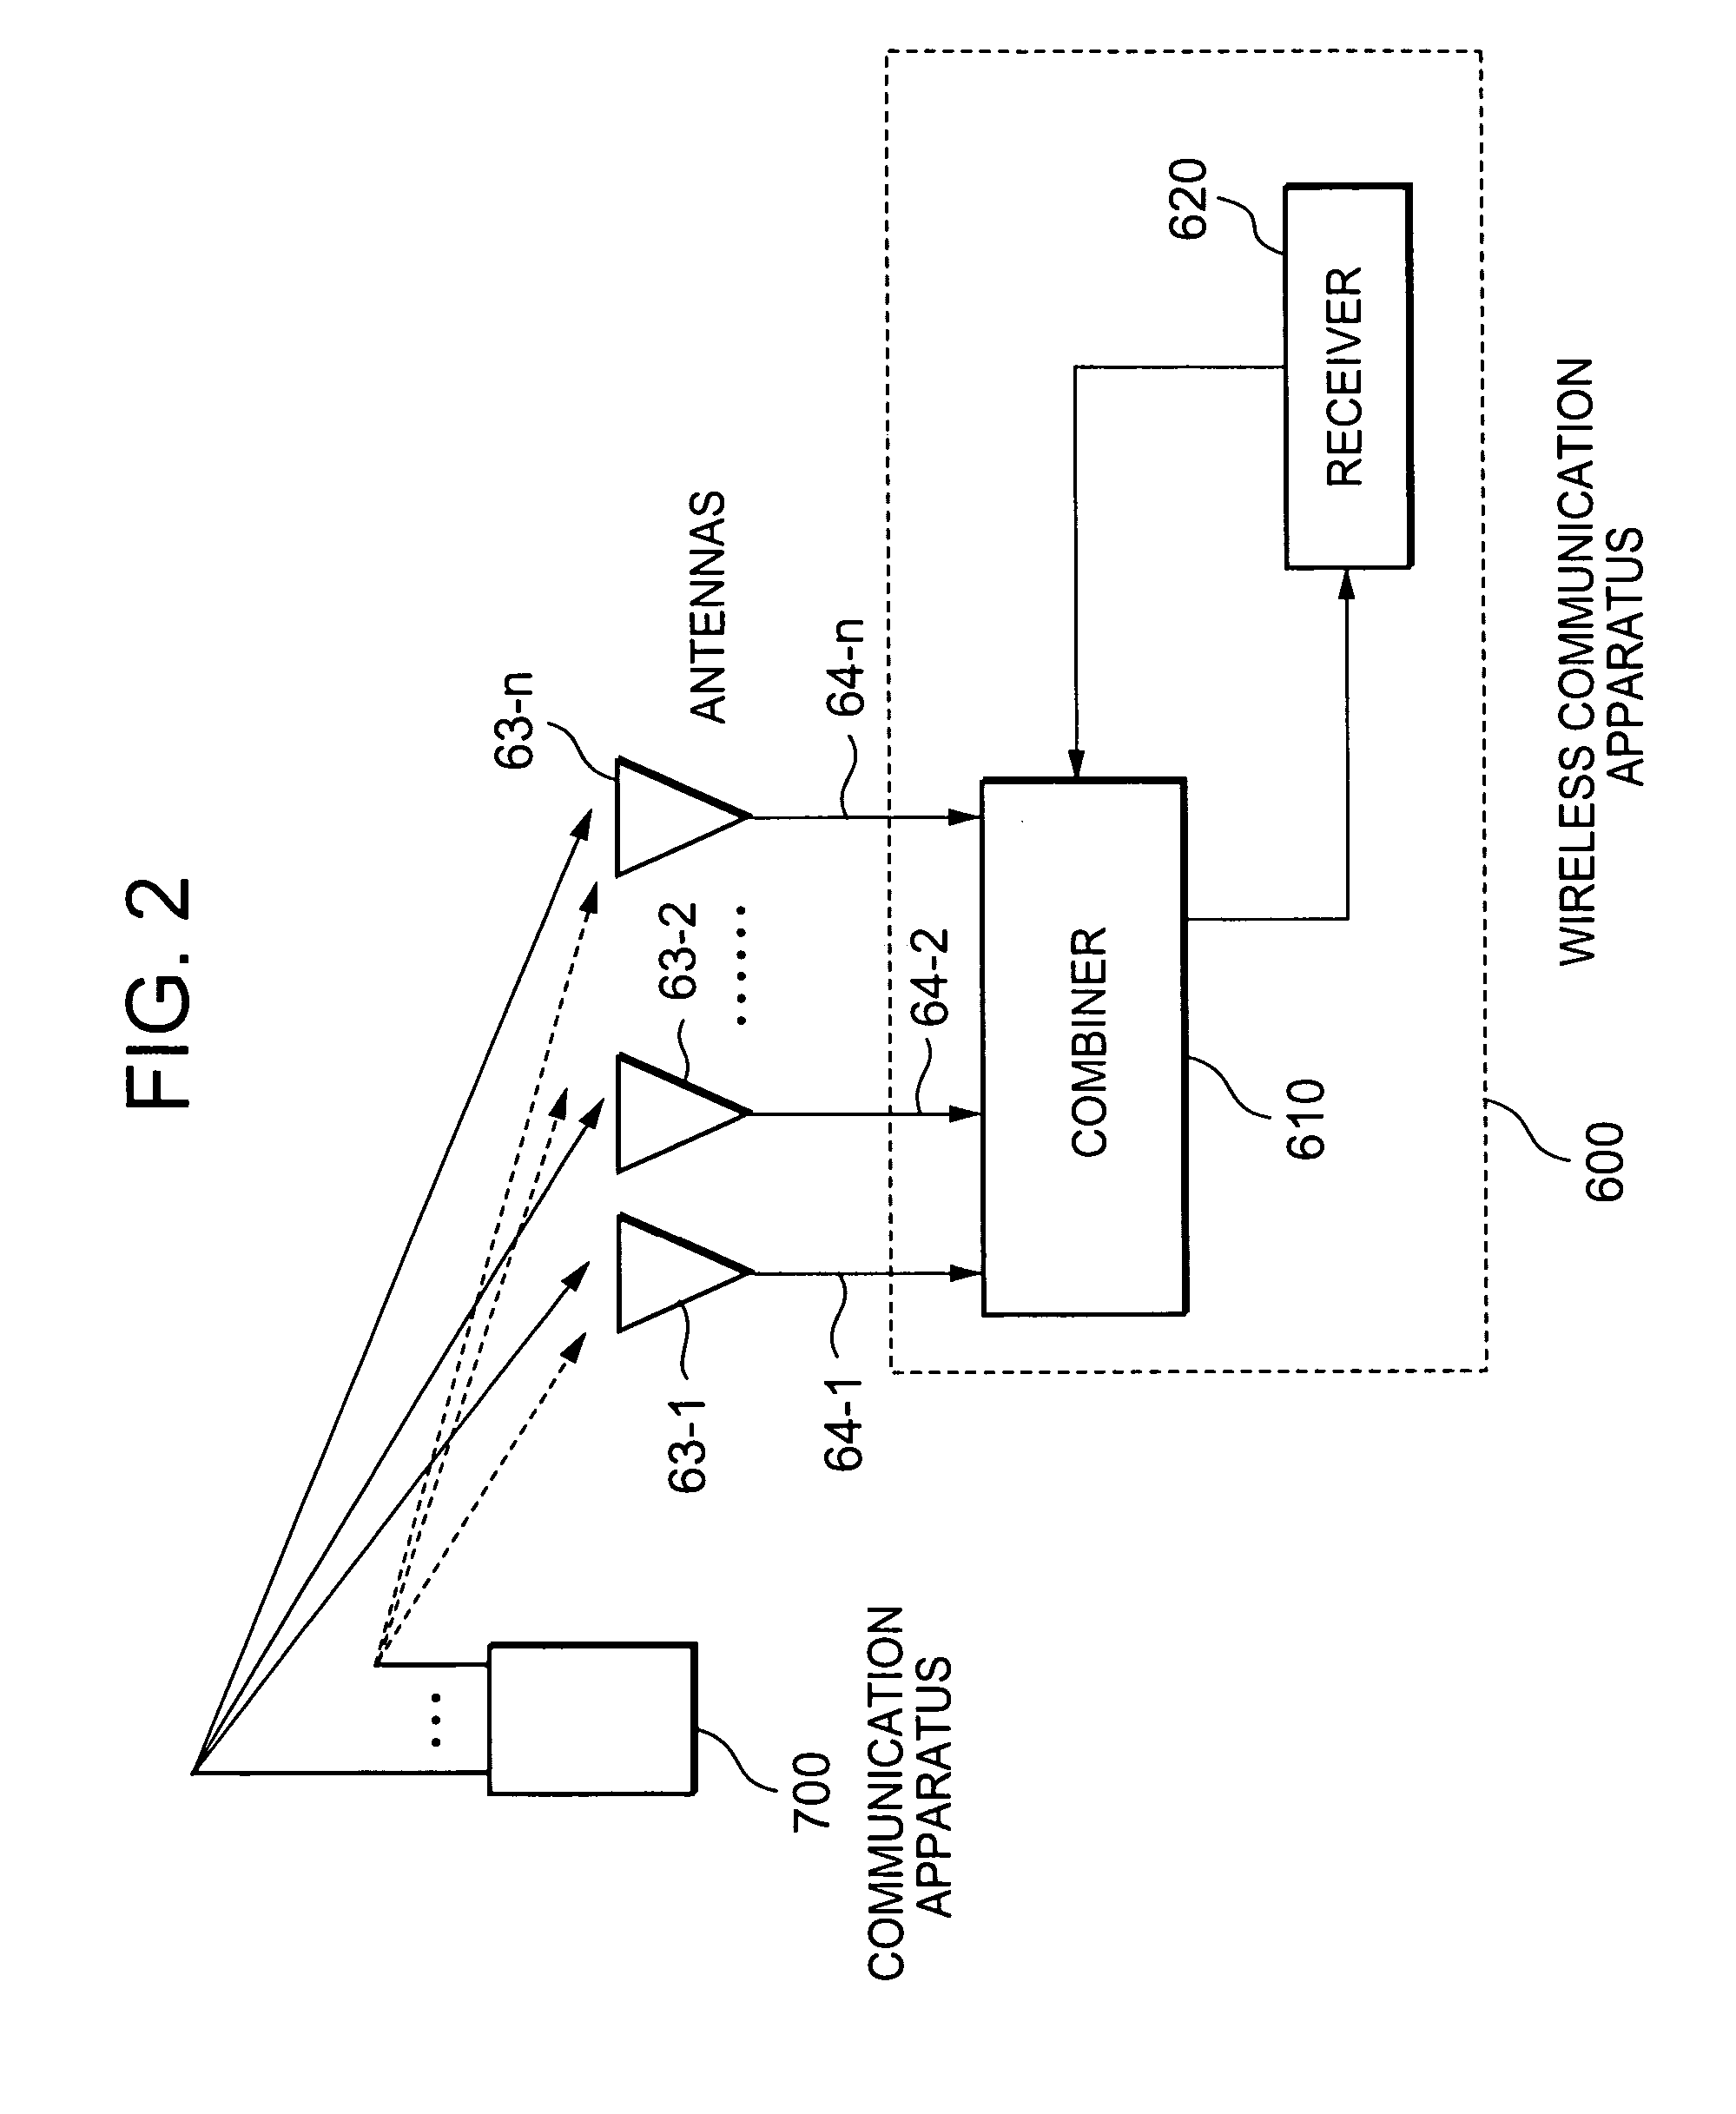 Wireless diversity receiver using a combiner with control weights that are based on reported transmission power